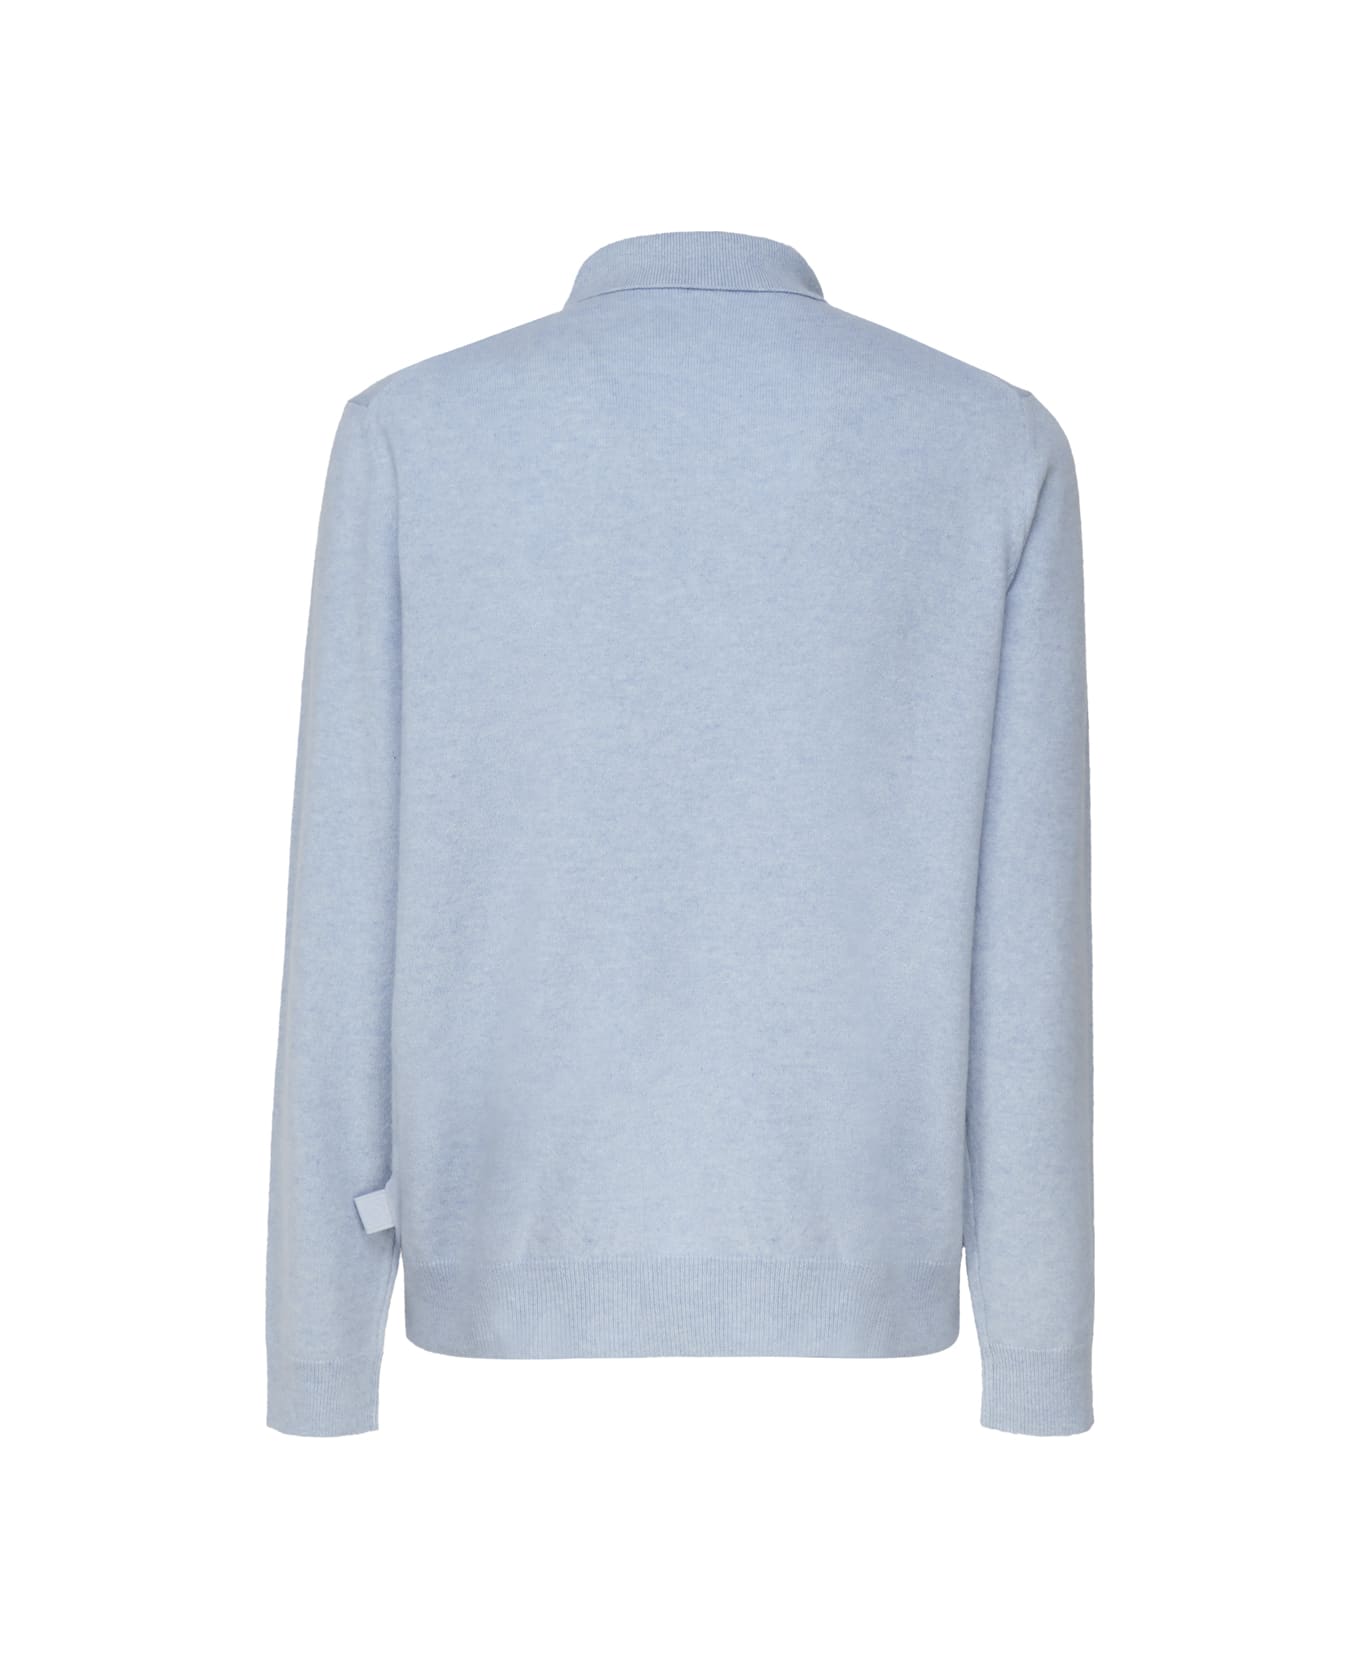 Loewe Polo Sweater In Soft Cashmere - Light blue